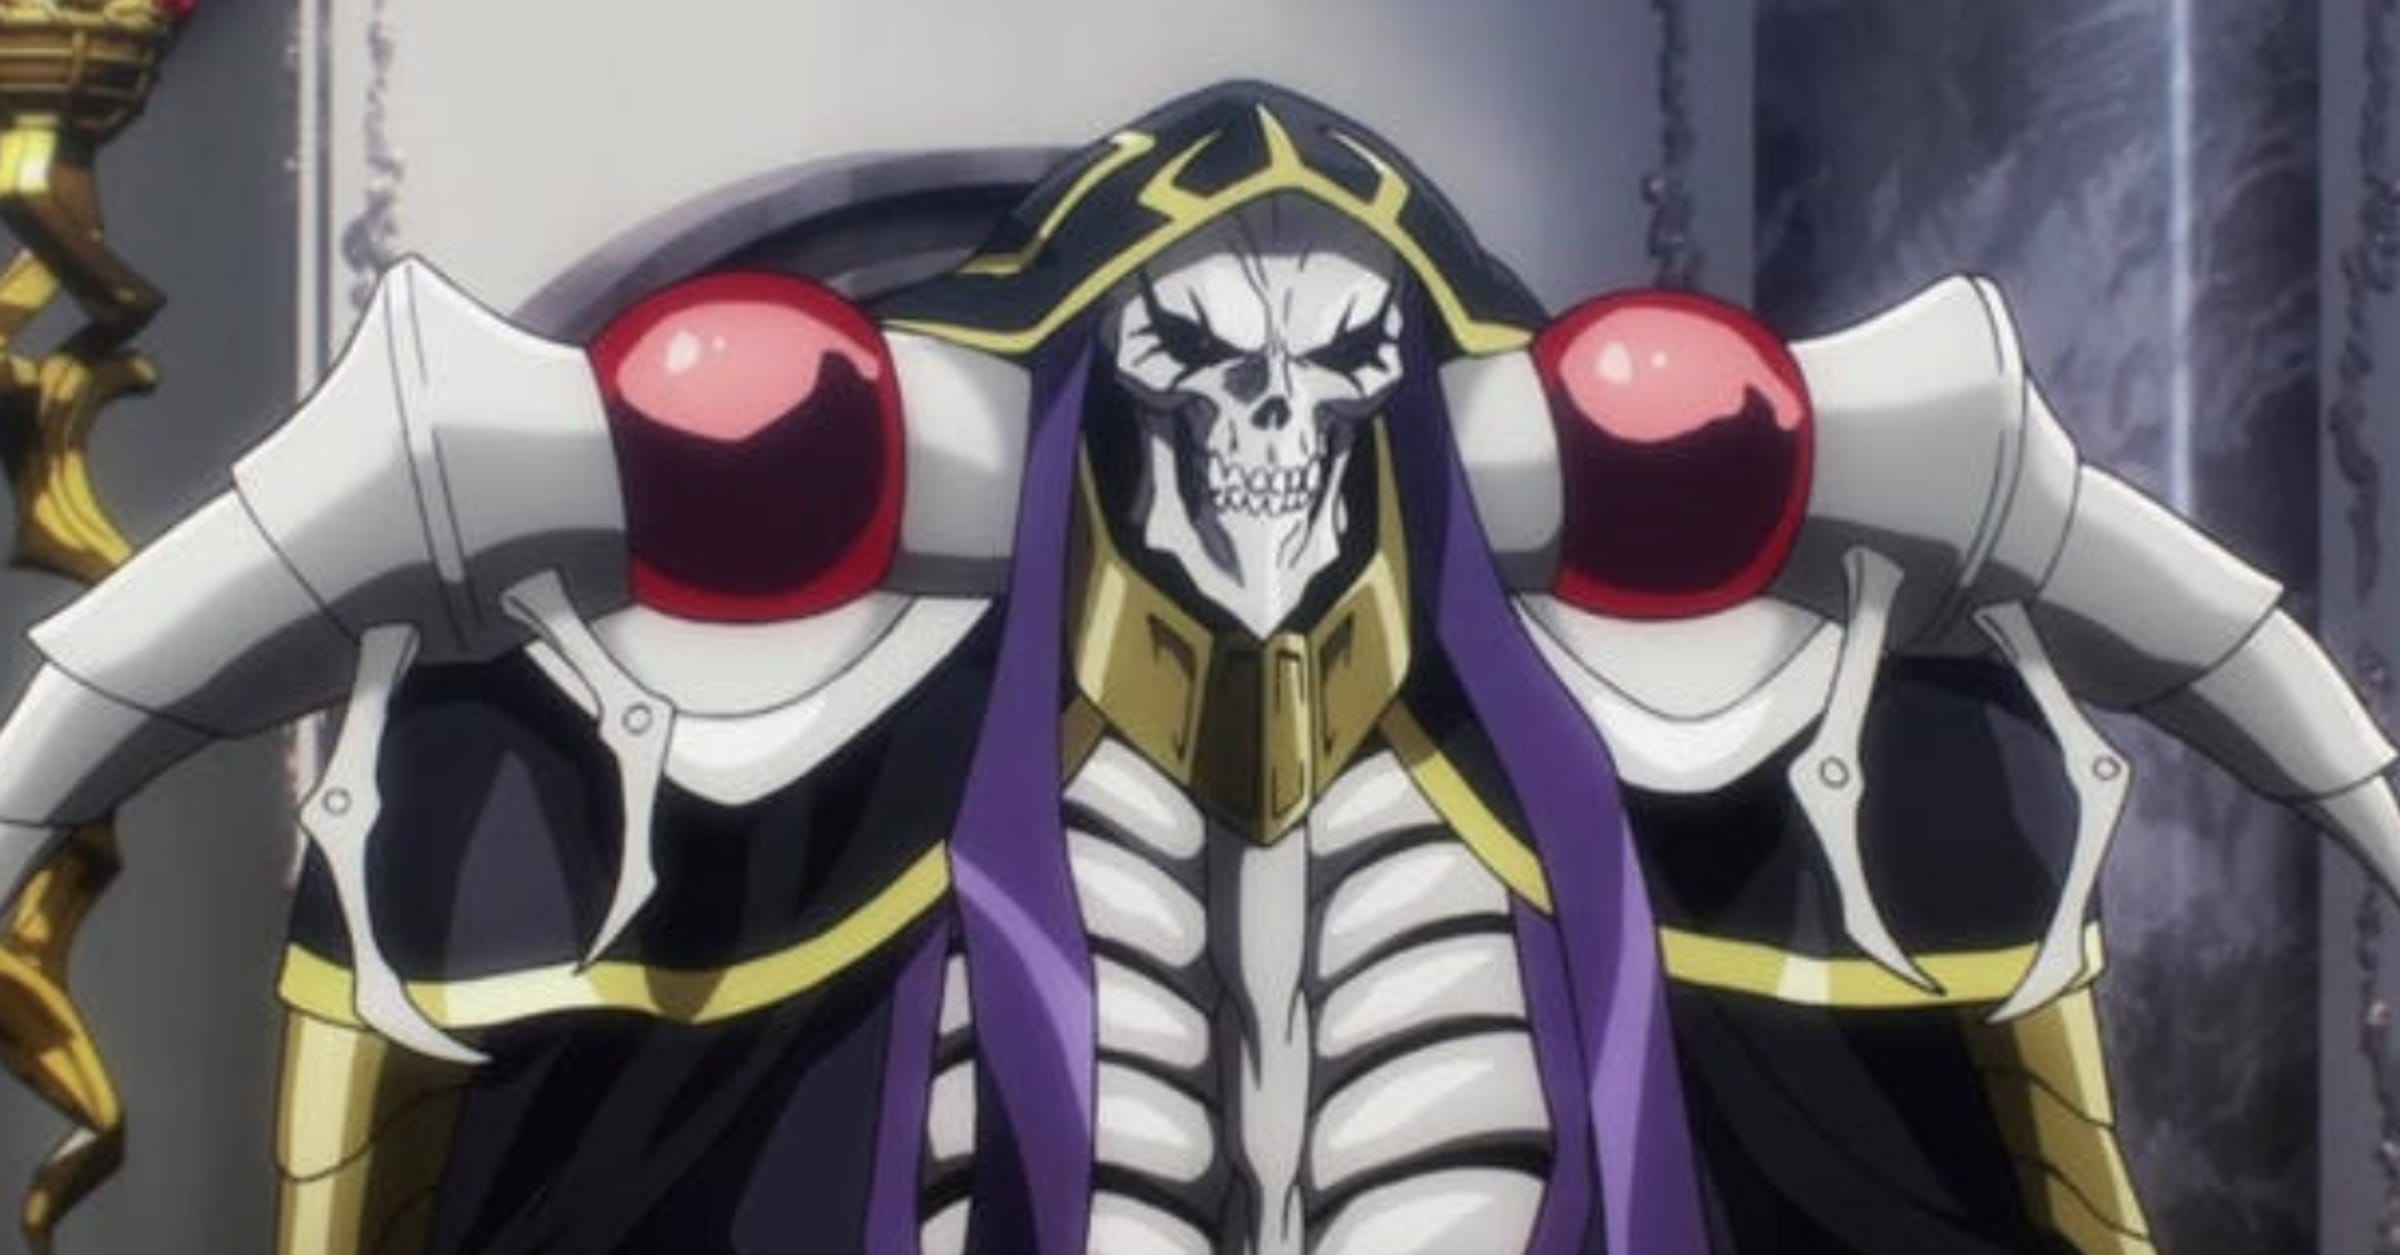 The 15+ Best Overlord Anime Quotes